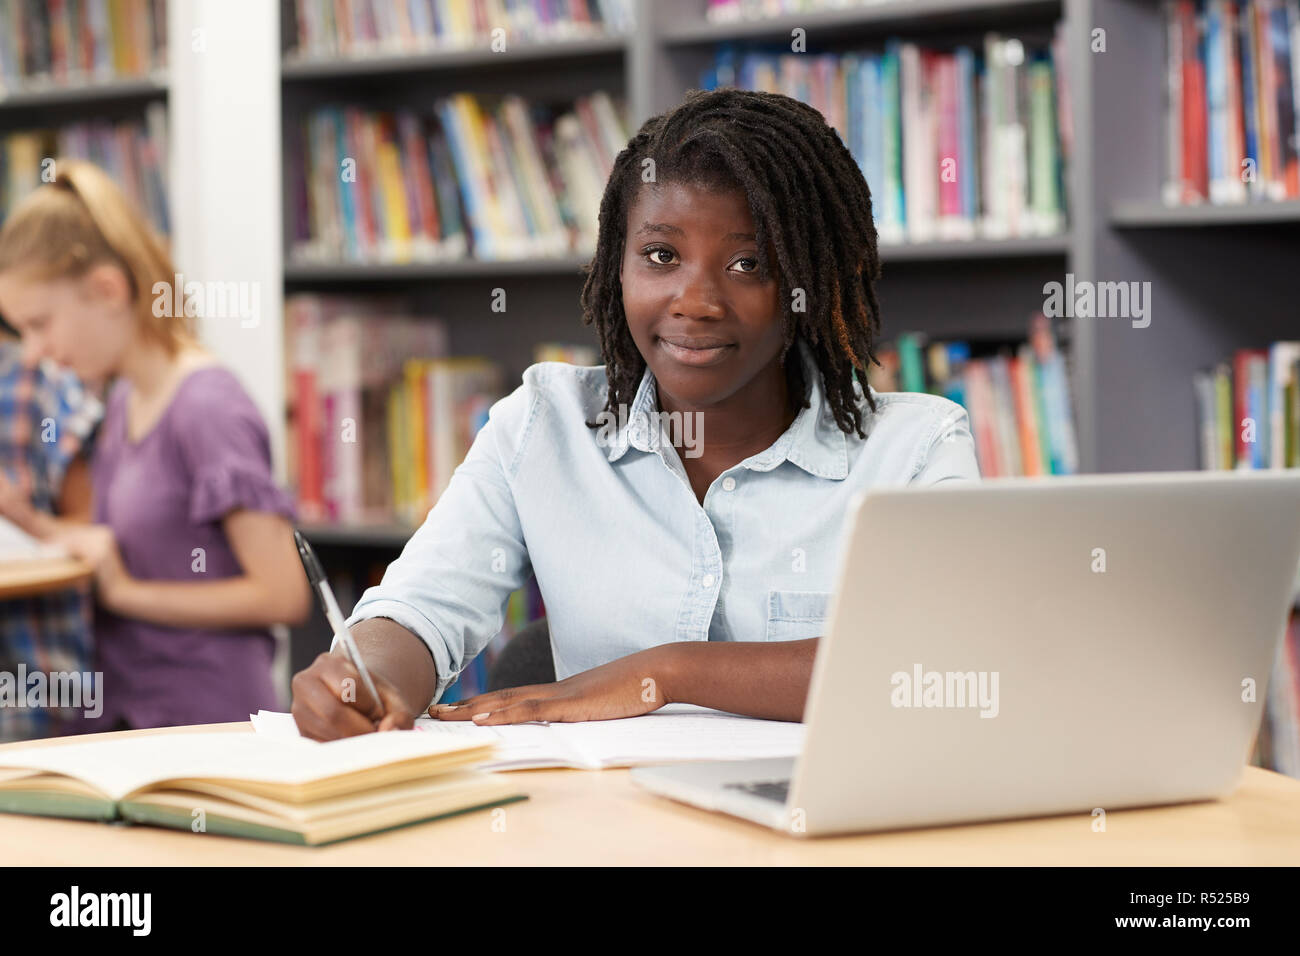 Portrait Of Female High School Student Working At Laptop In Library Stock Photo